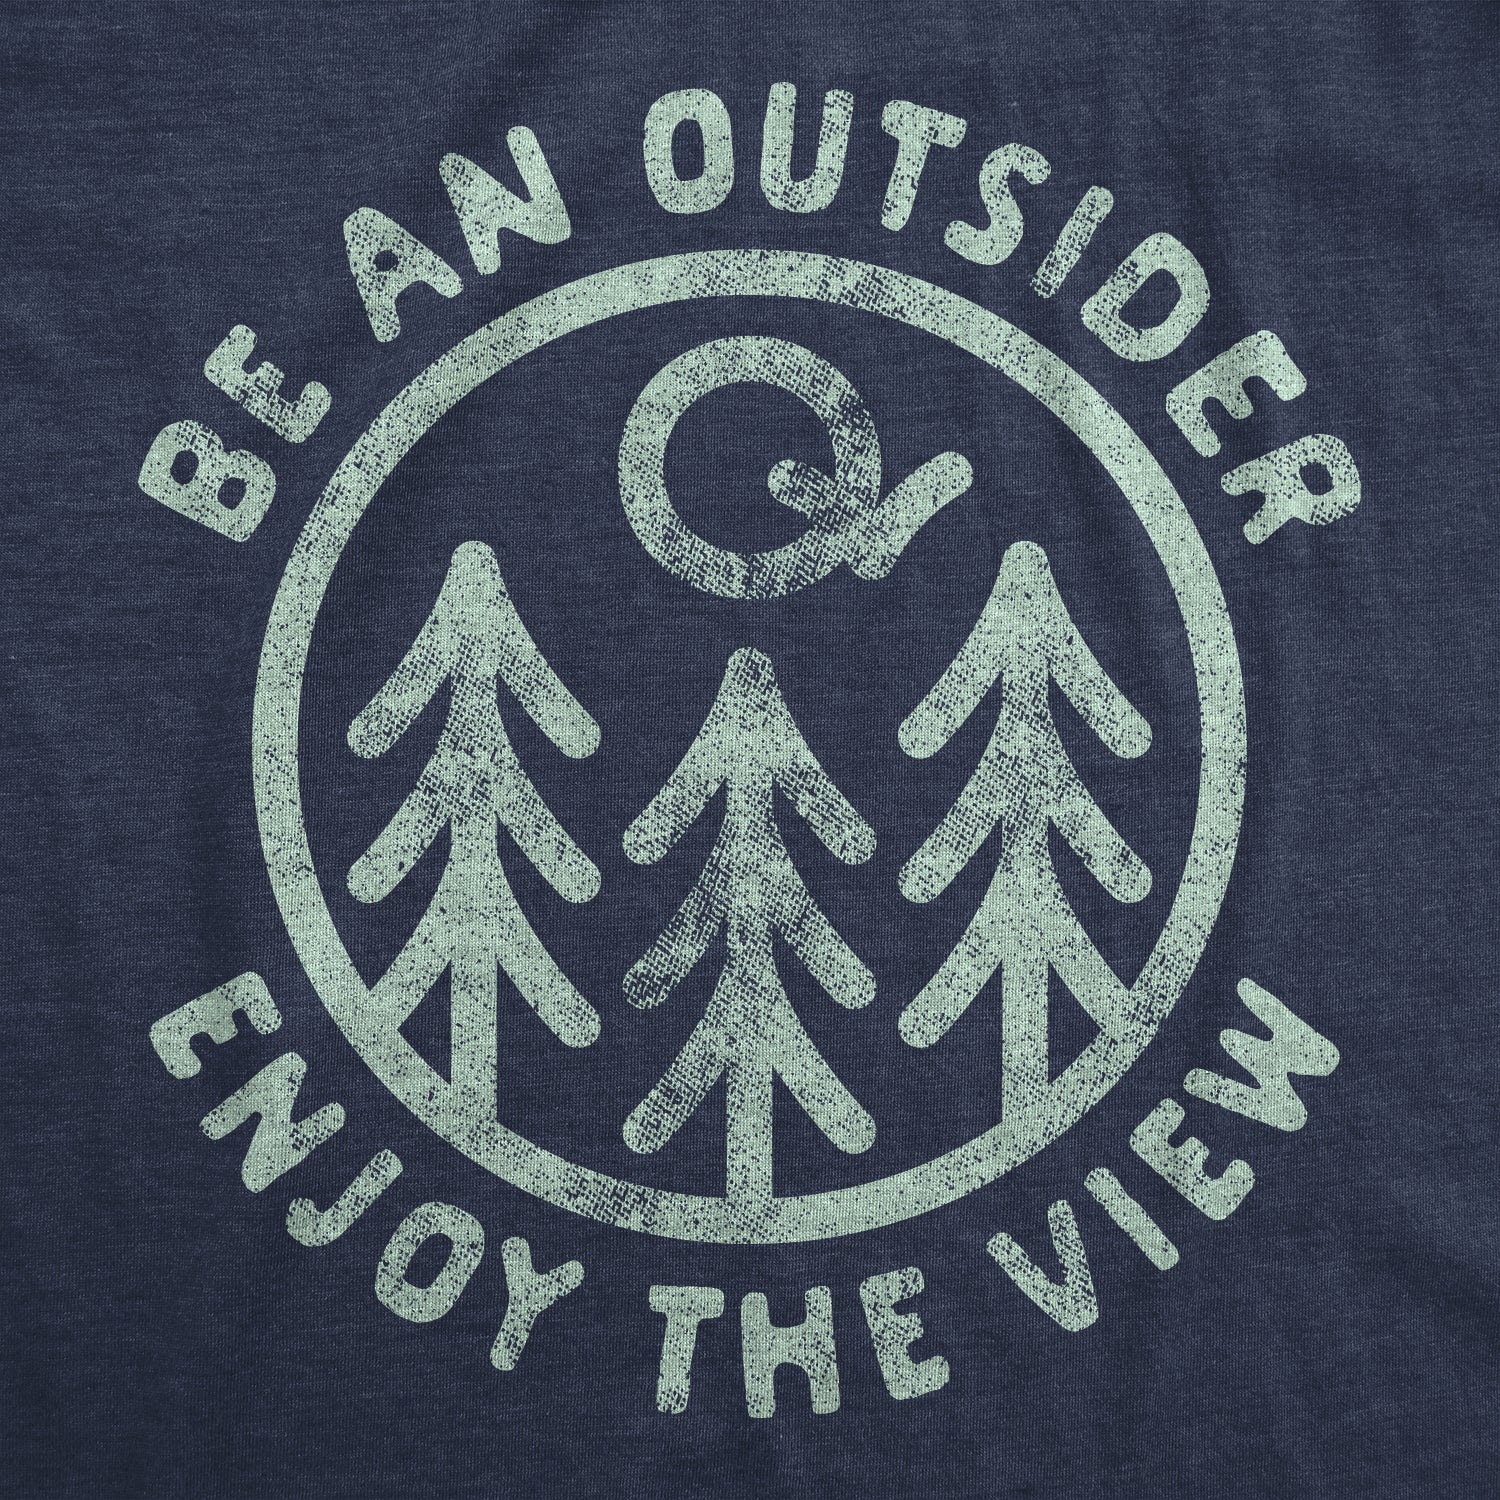 Funny Heather Navy - Outsider Be An Outsider Enjoy The View Womens T Shirt Nerdy camping Tee